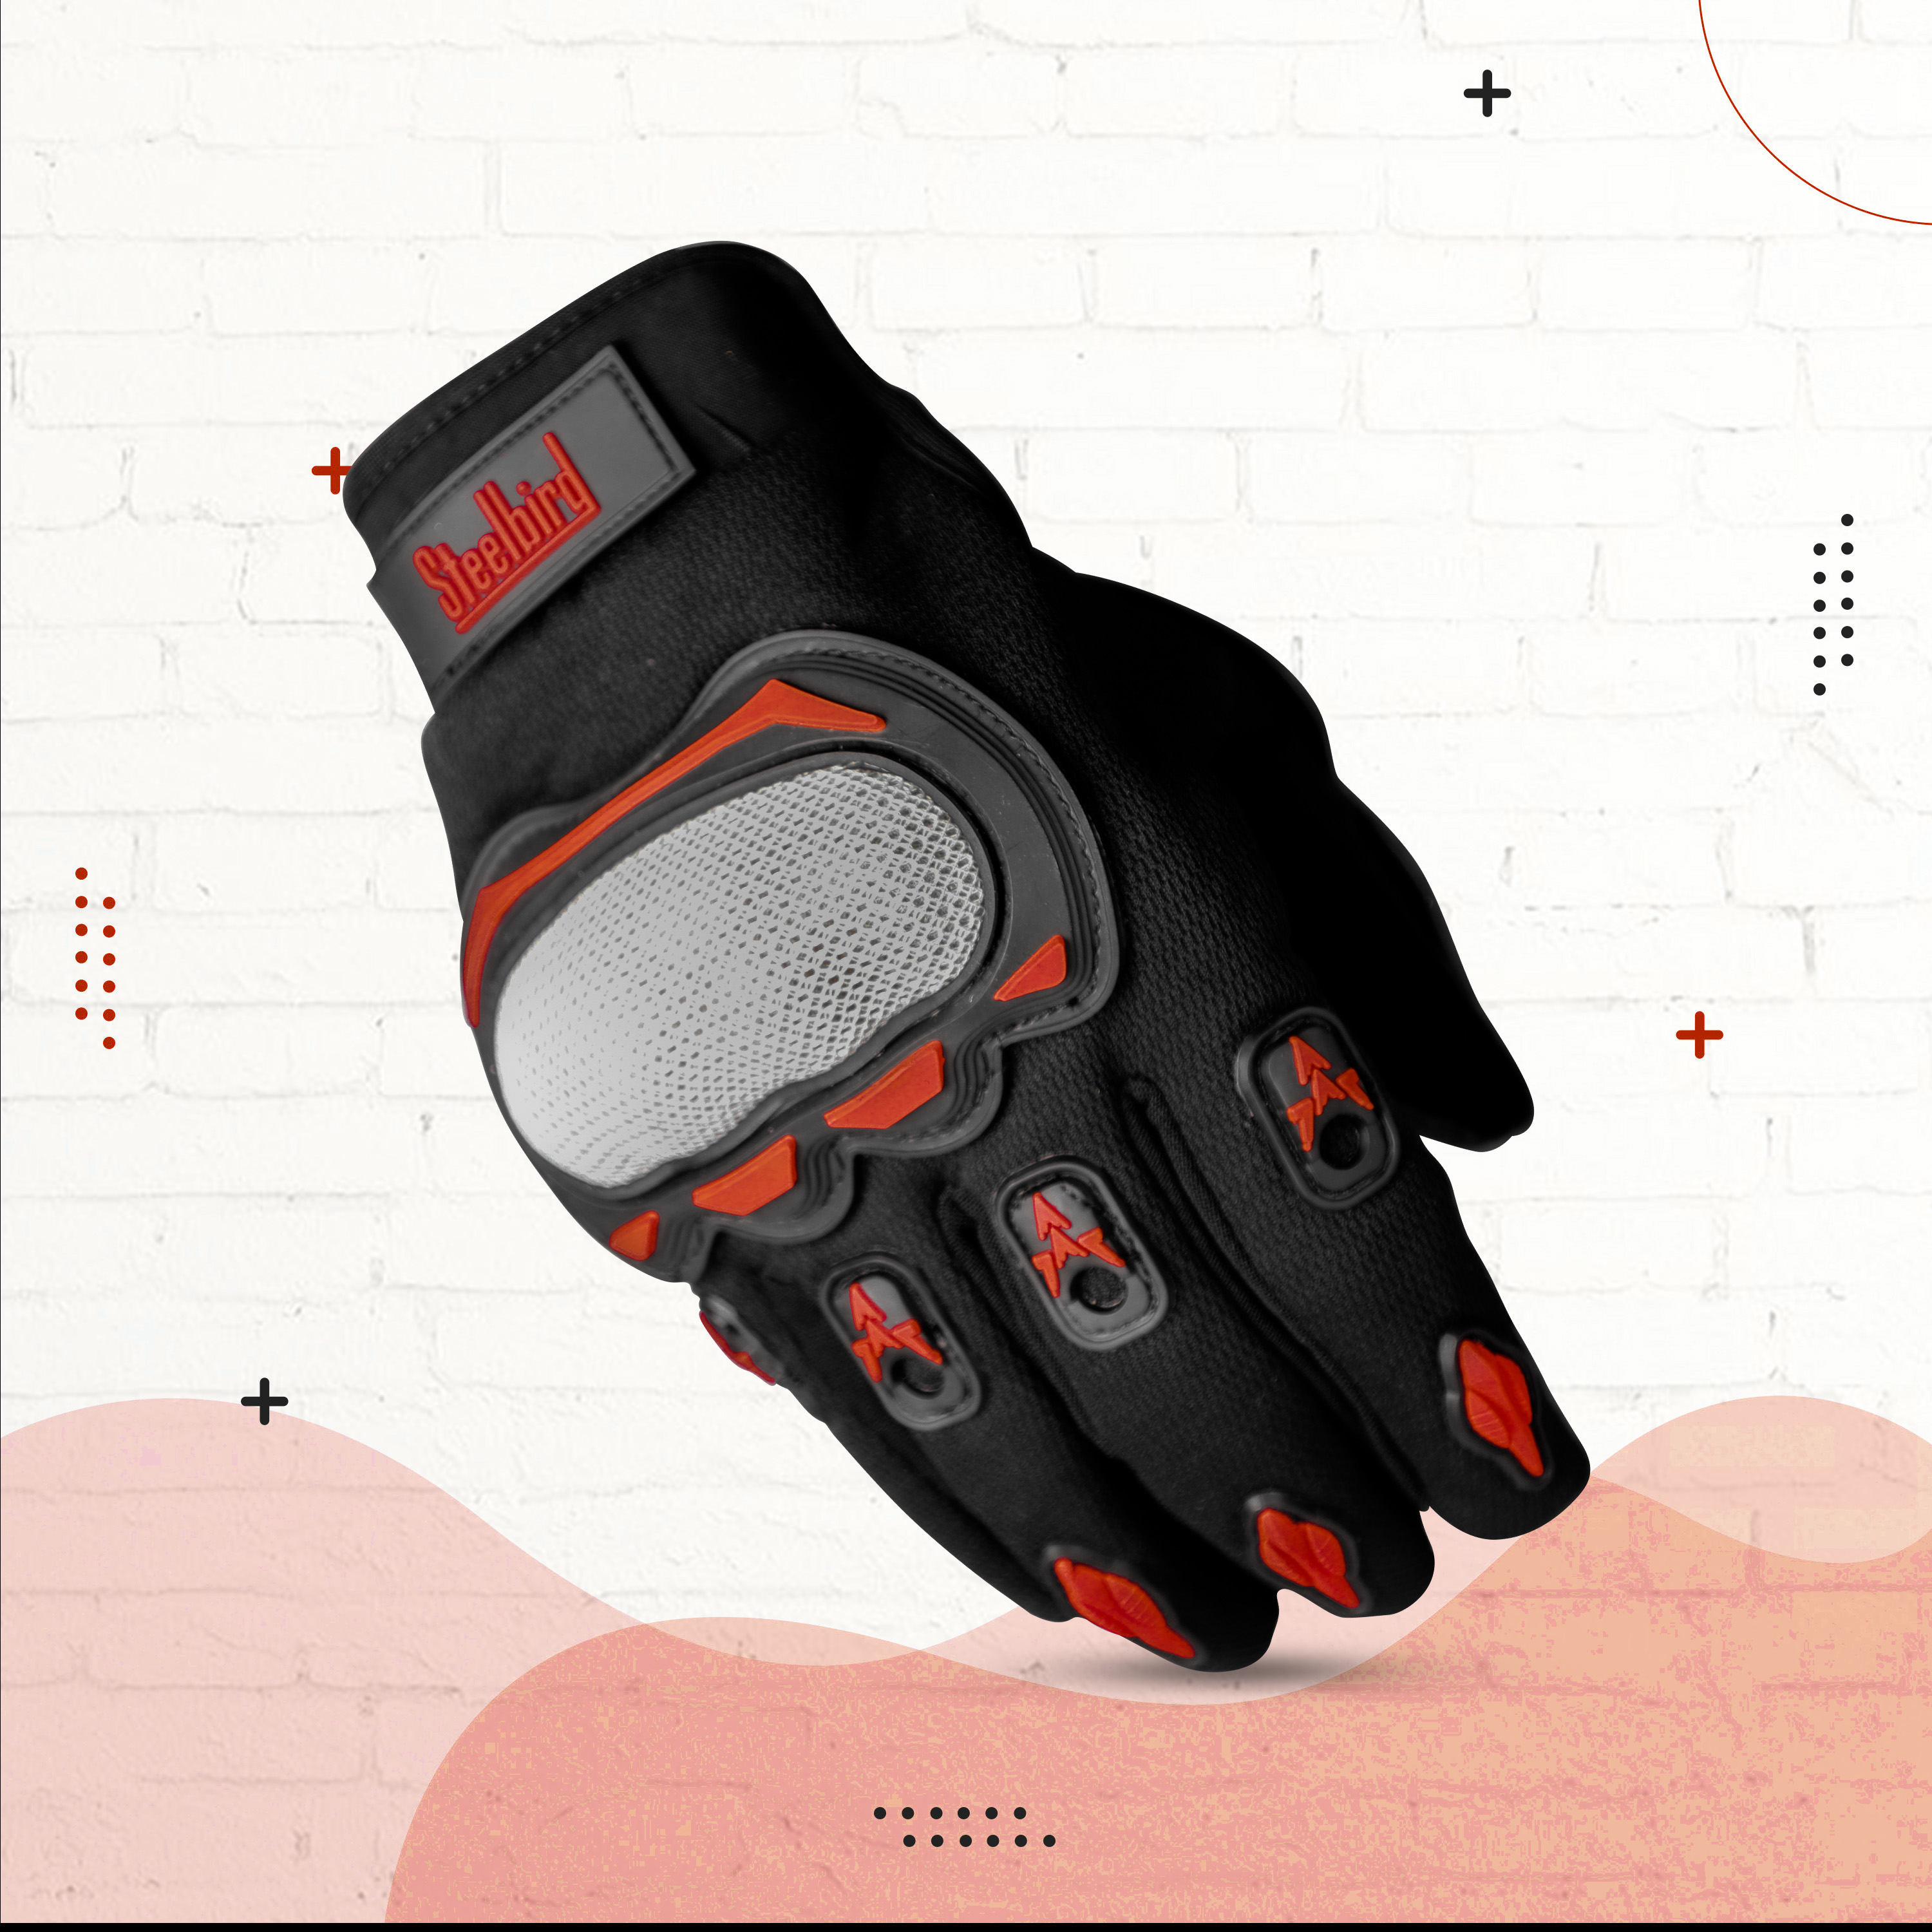 Steelbird Experience 1.0 Reflective Full Finger Bike Riding Gloves With Touch Screen Sensitivity At Thumb And Index Finger, Protective Off-Road Motorbike Racing (Black Red)